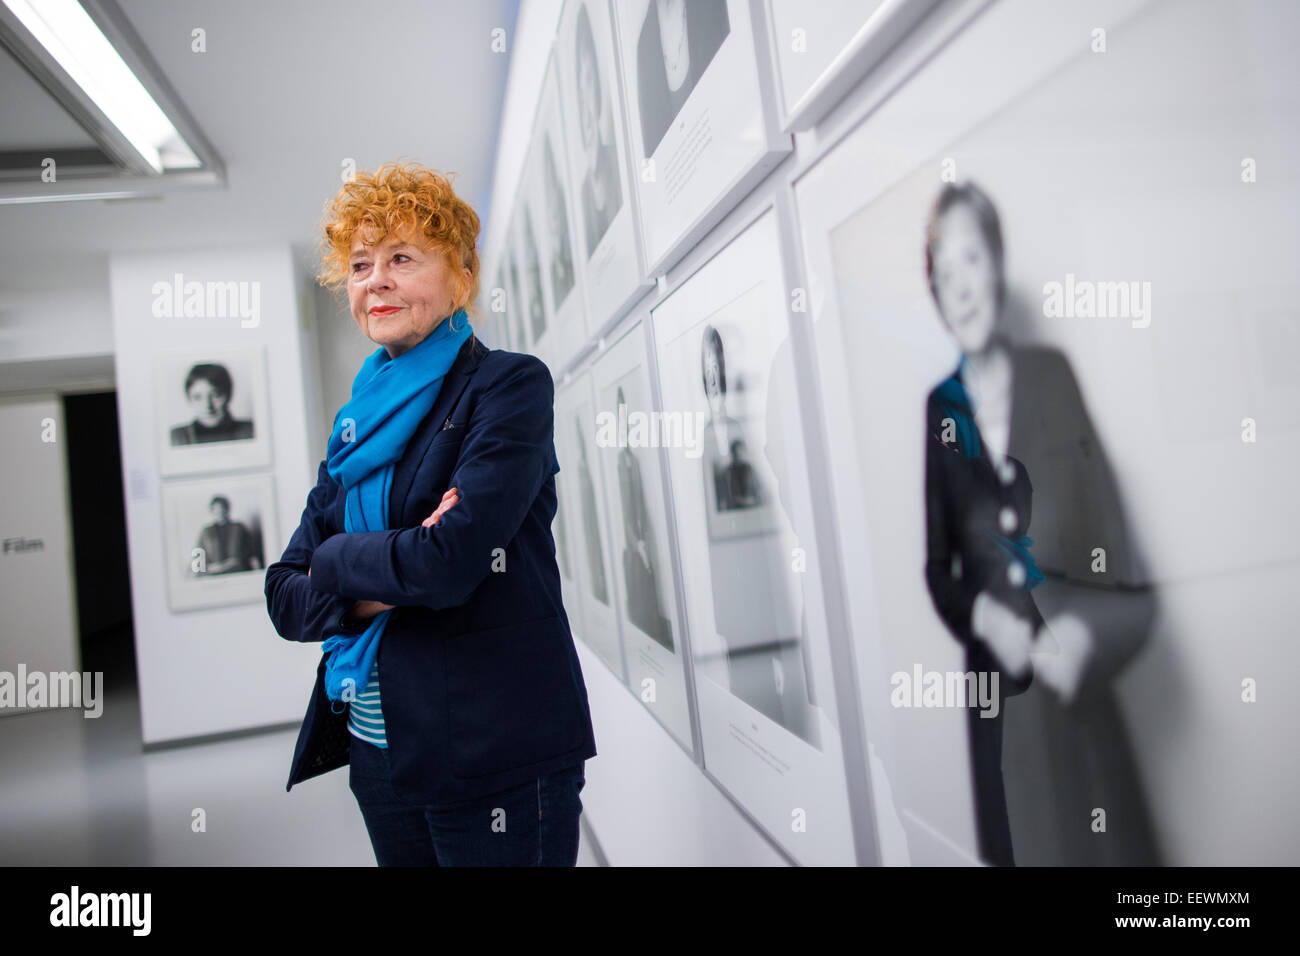 Photographer Herlinde Koelbl stands in front of a photograph from her series 'Spuren der Macht' (lit. Traces of Power) of Chancellor Angela Merkel in the Ludwig Galerie Schloss Oberhausen in Oberhausen, Germany, 22 January 2015. The exhibition (25 January 2015 to 3 March 2015) entitled 'Das deutsche Wohnzimmer, Spuren der Macht, Haare und andere menschliche Dinge - Fotografien von 1980 bis heute' (lit. The German living room, traces of power, hair, and other human things - Photographs from 1980 to today' brings together works from the German artist's important artistic phases. Photo: RALF VENN Stock Photo